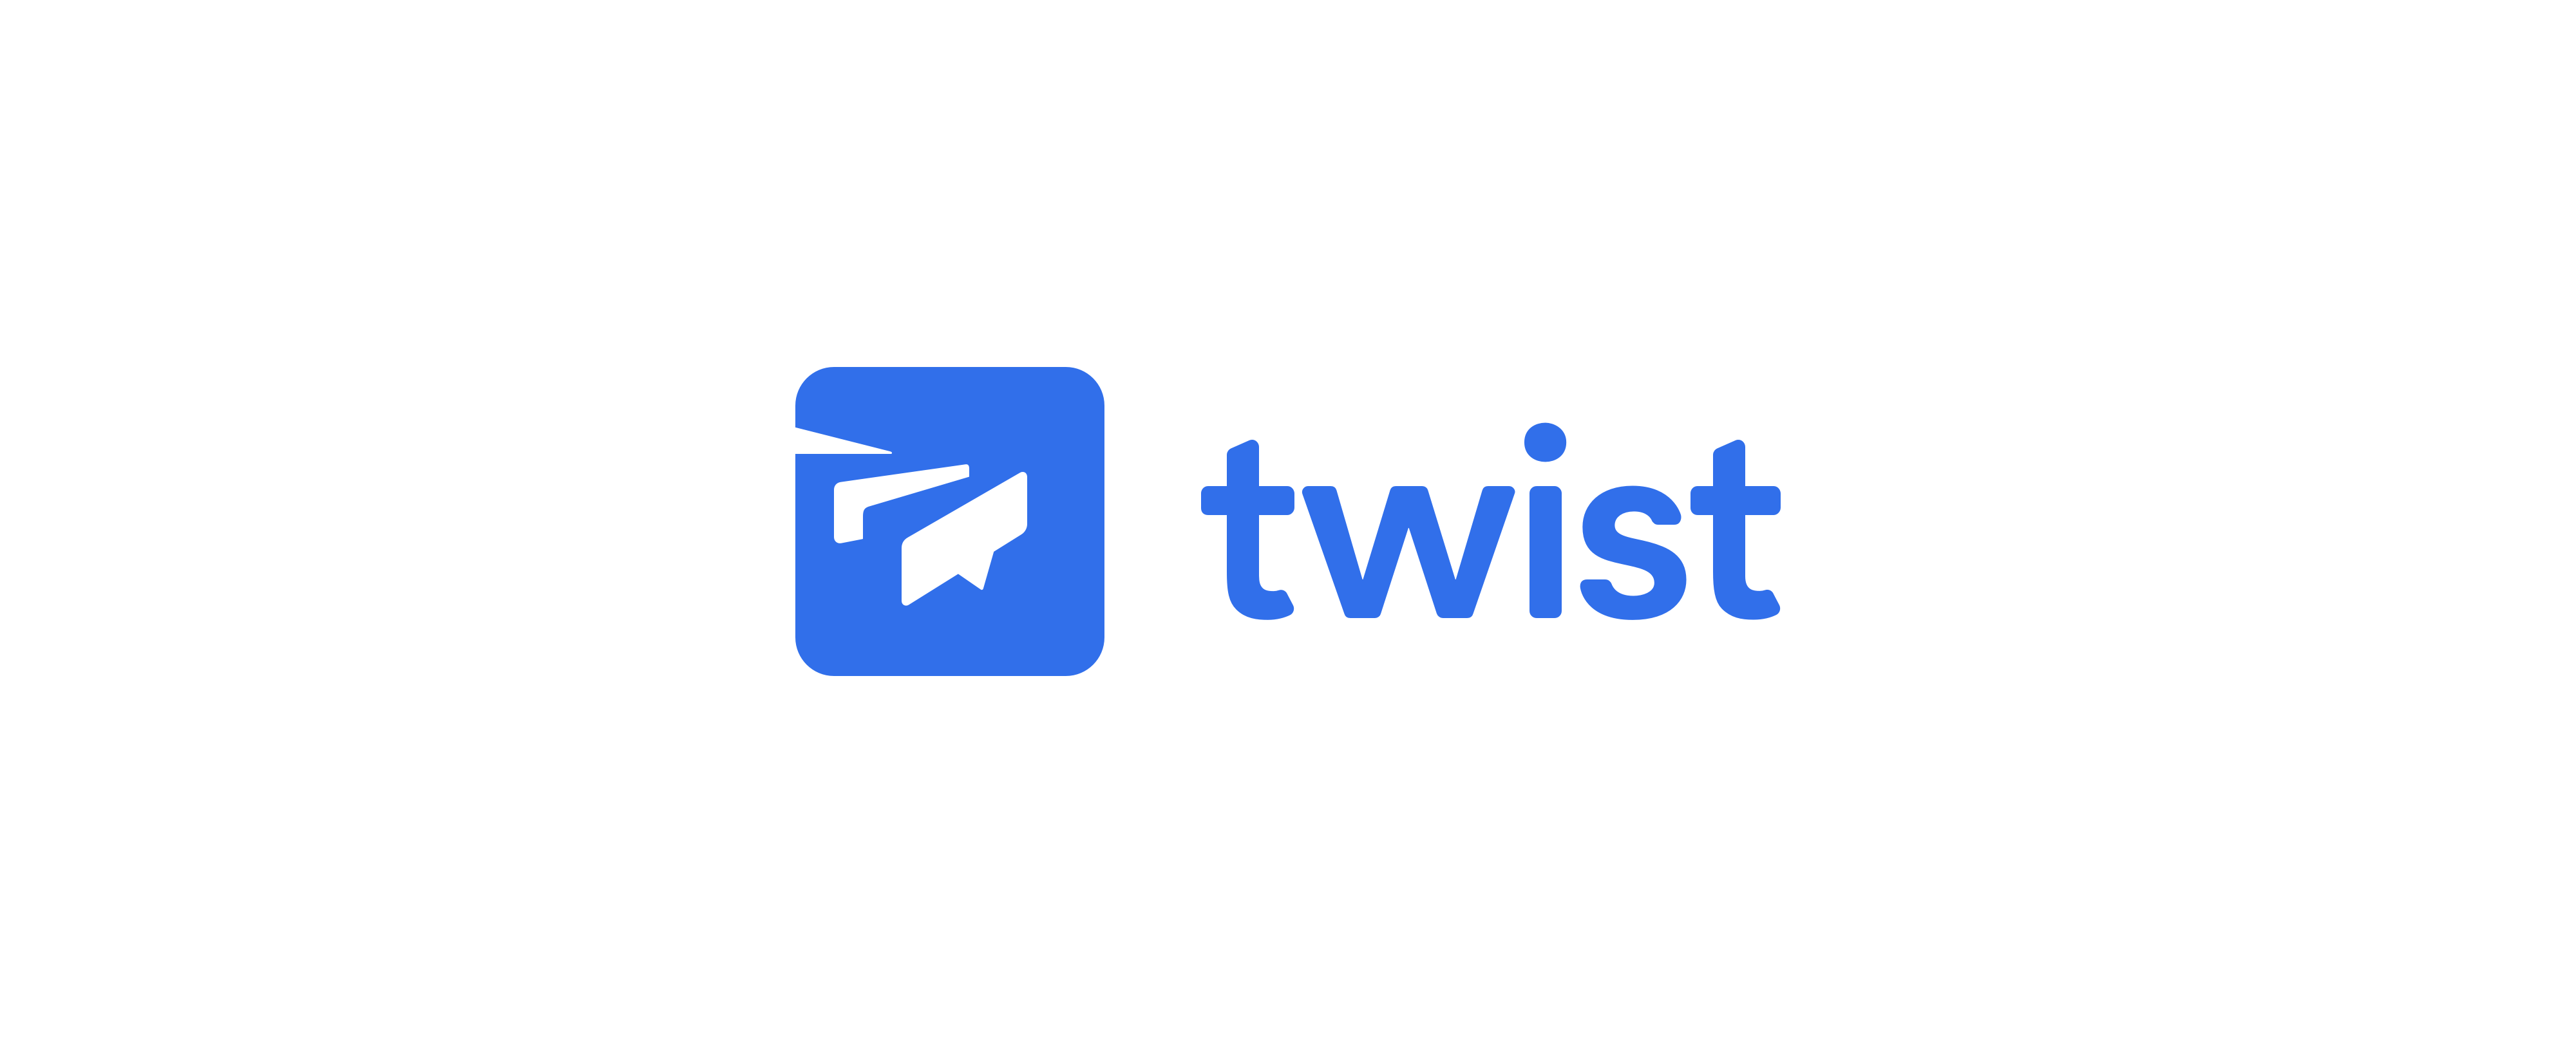 Twiist Logo - Announcing Twist, a Fundamentally Different Way to Work Together